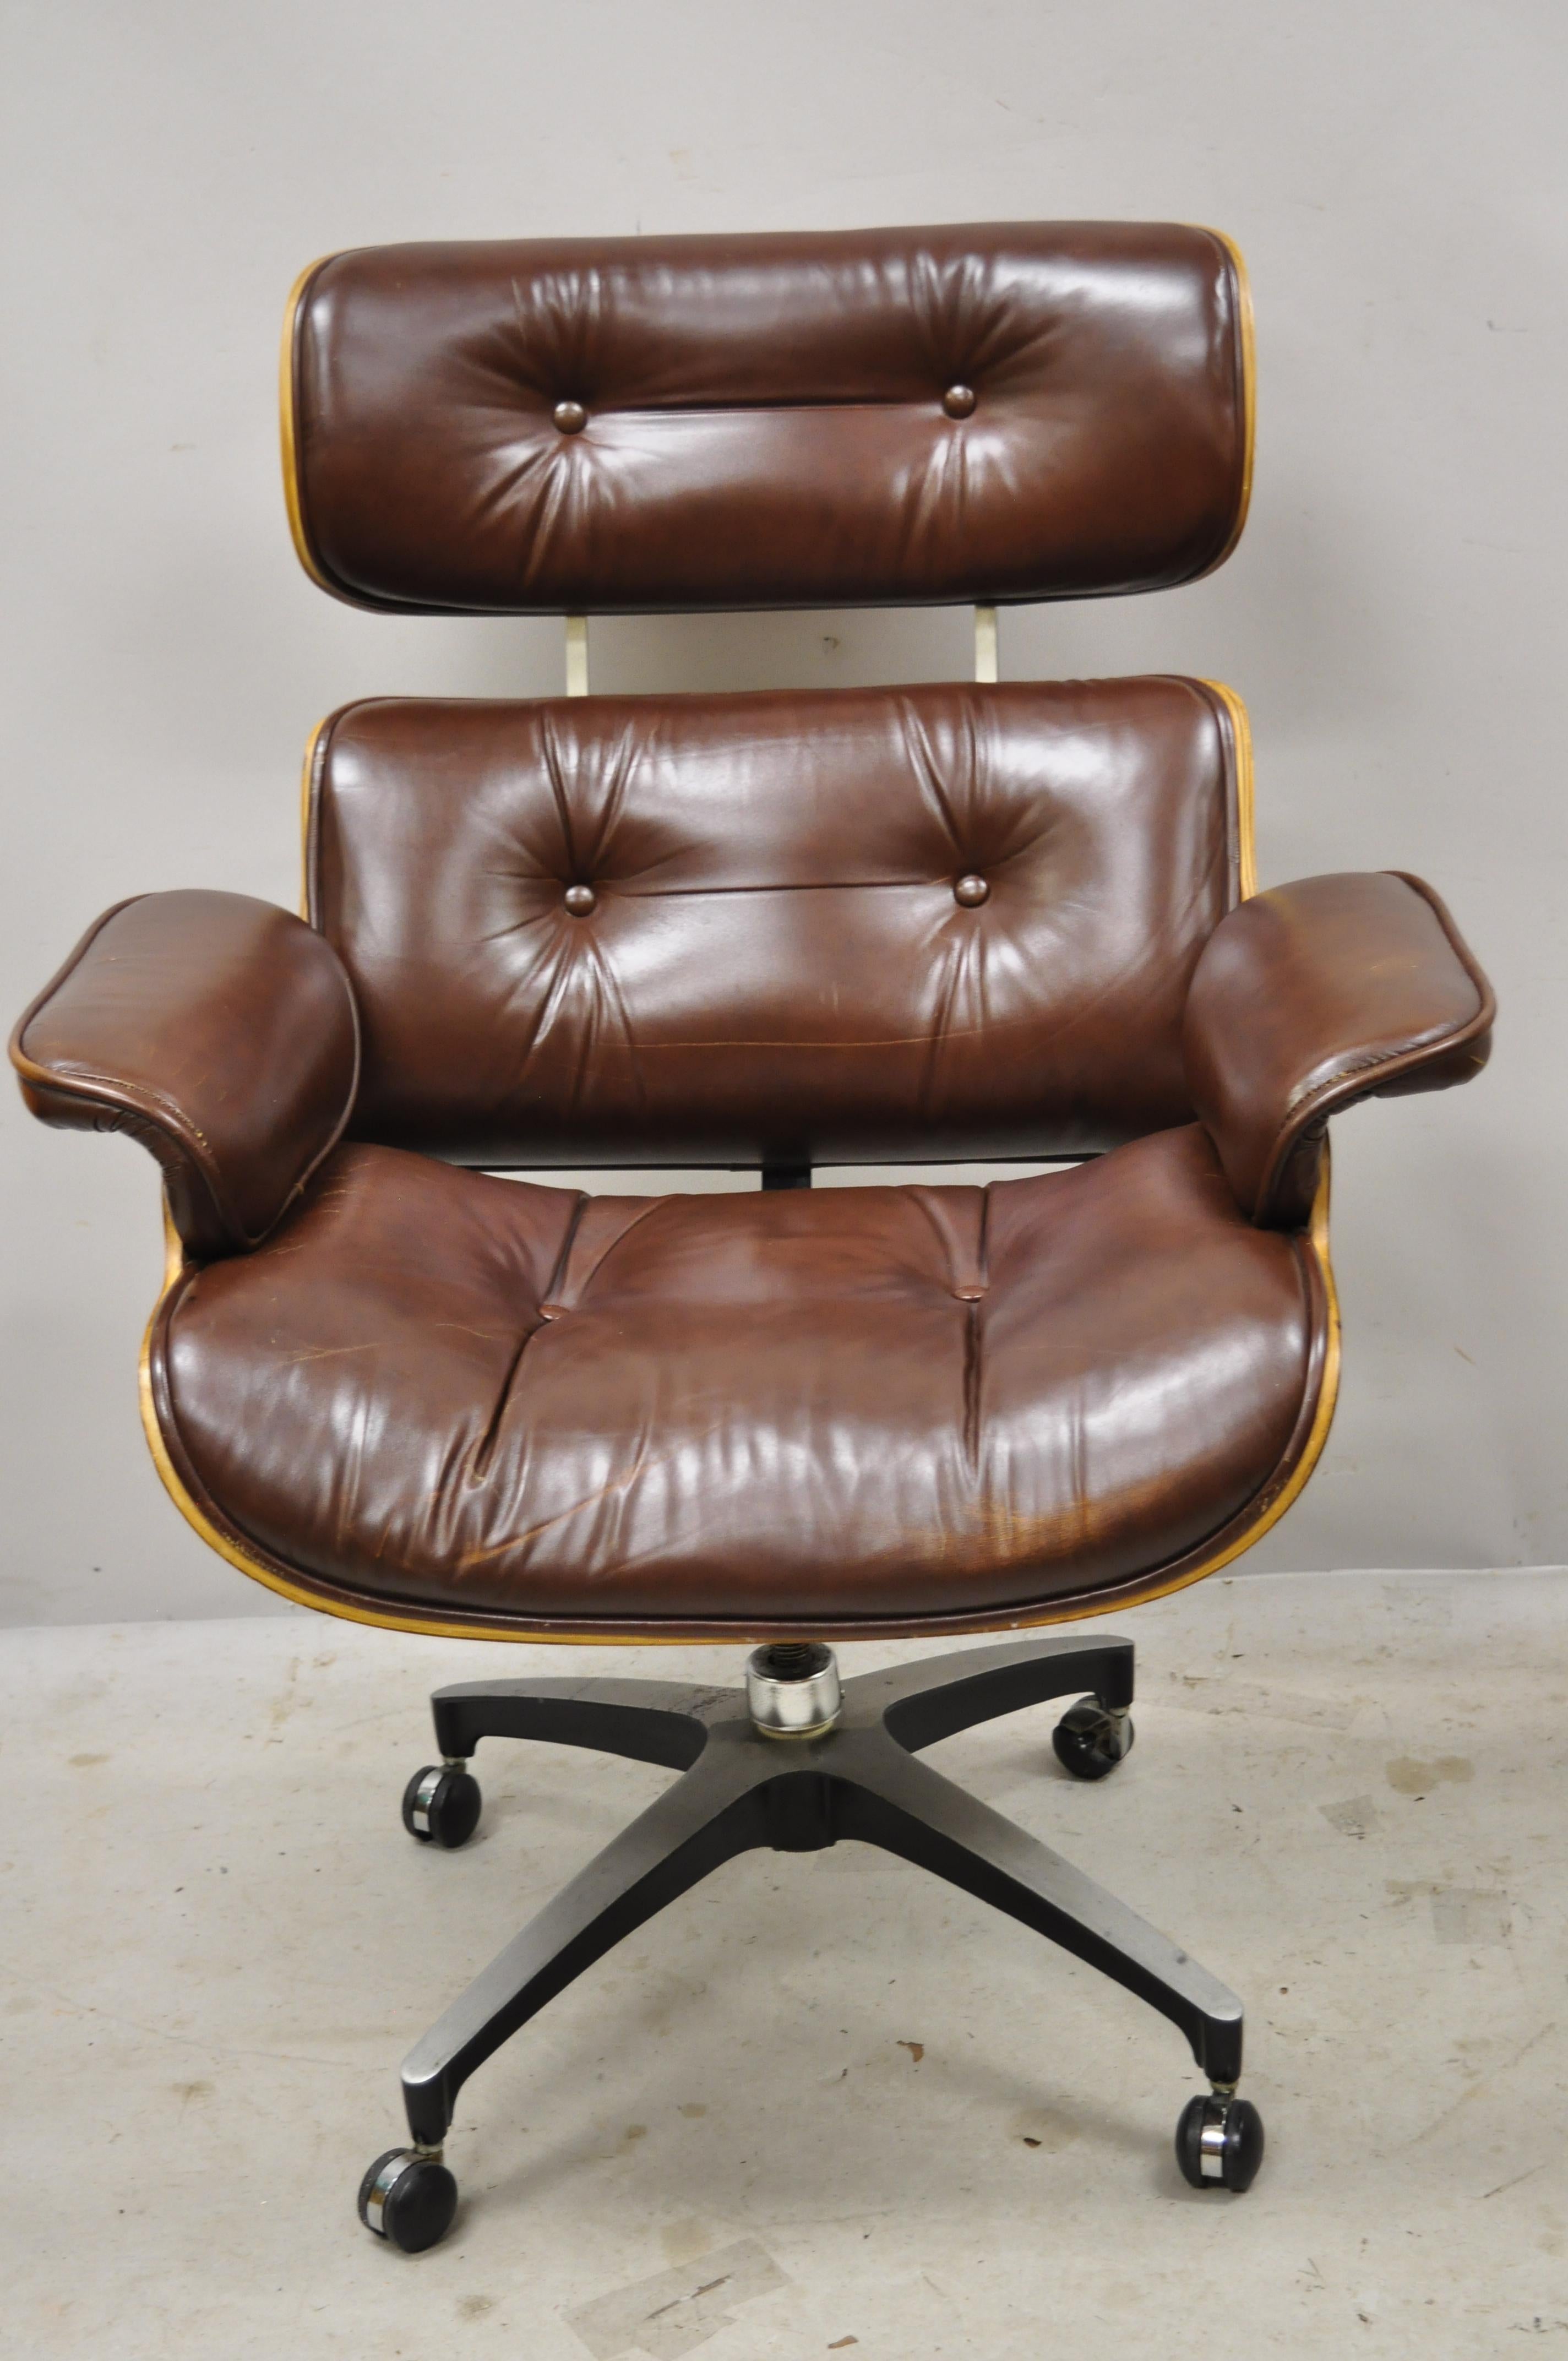 Frank Doerner Eames style brown vinyl rolling swivel office desk lounge chair. Item features rolling casters, tufted upholstery, beautiful wood grain, upholstered armrests, original stamp, clean modernist lines, great style and form. Circa 1975.